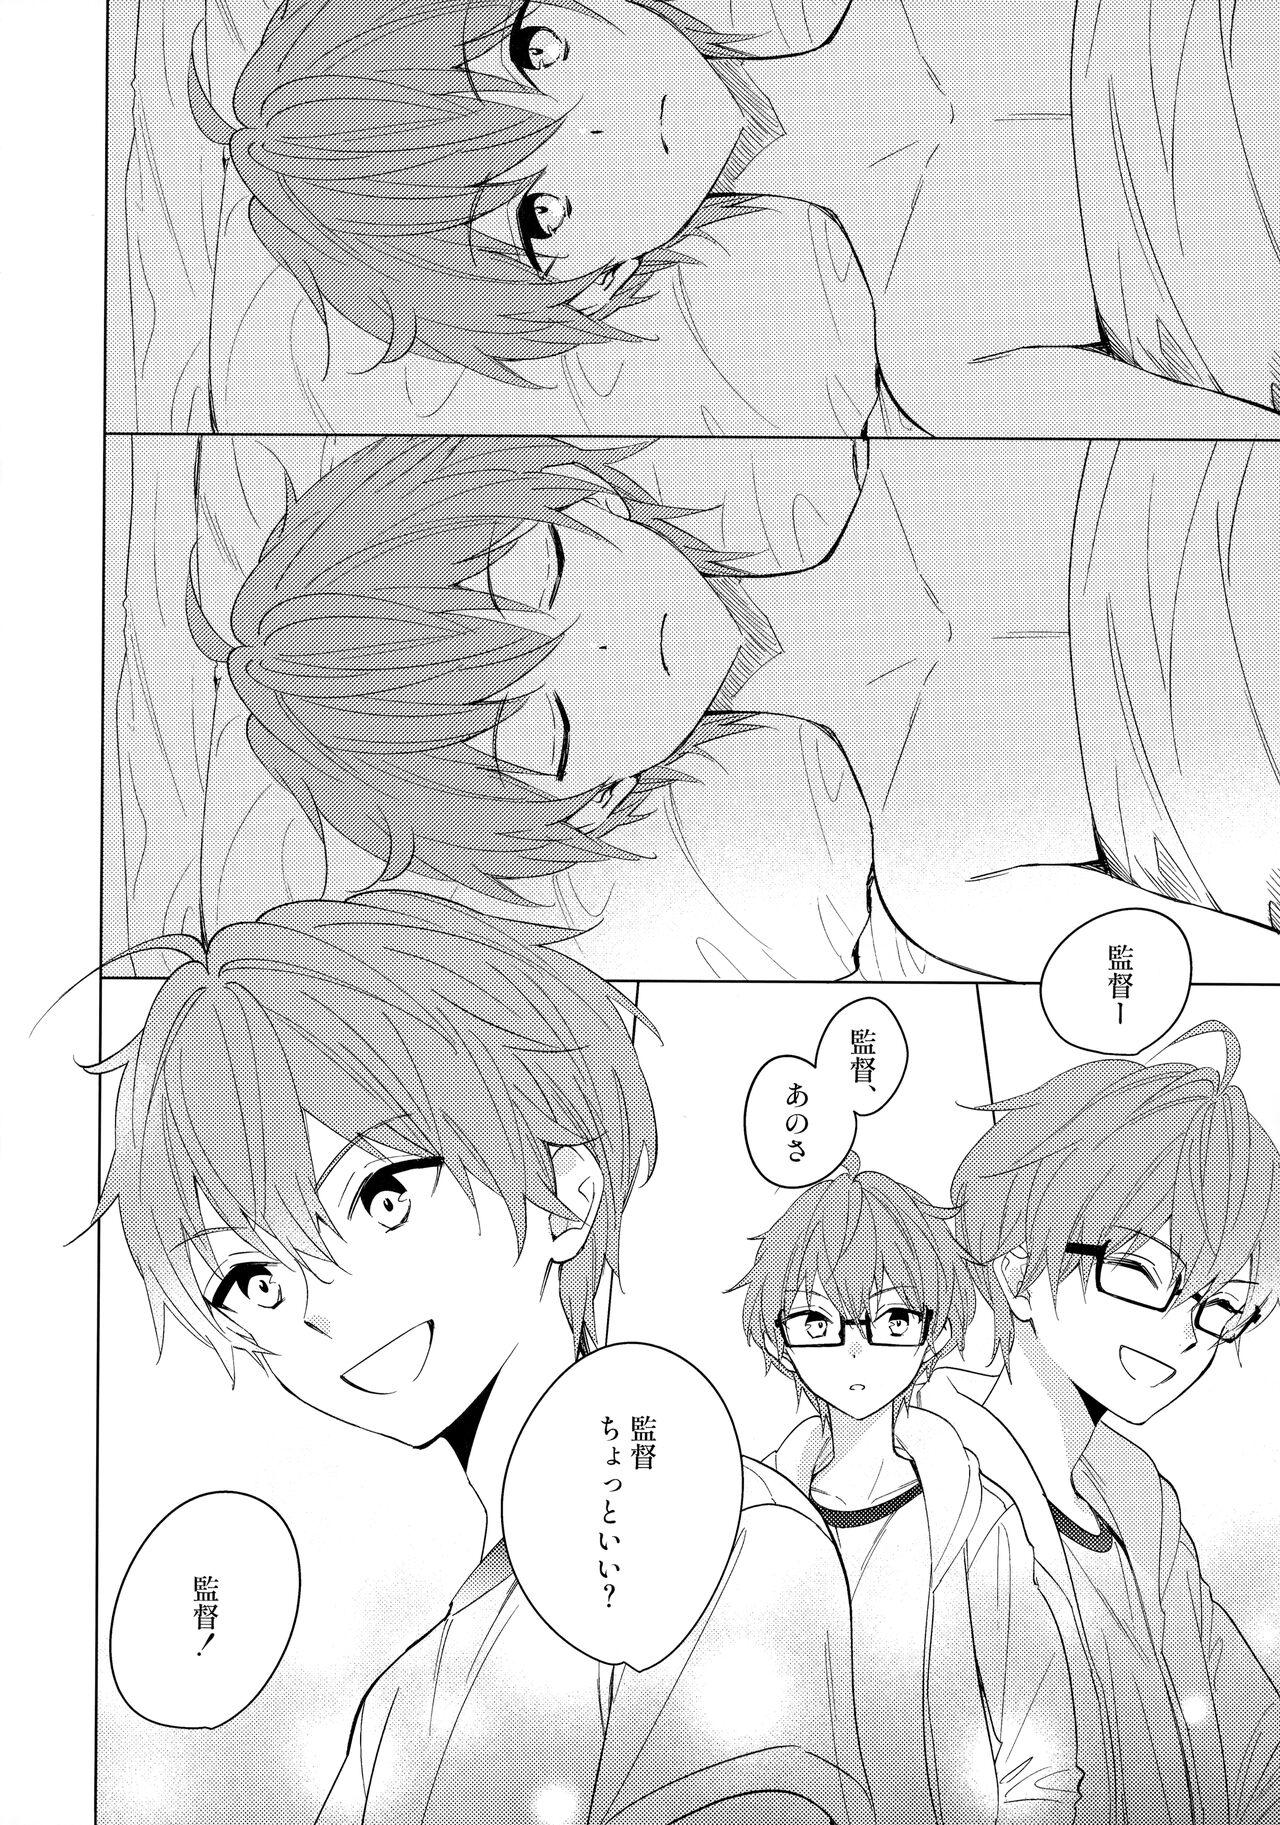 Gay 3some june, lemon, and you - The idolmaster sidem Chaturbate - Page 5